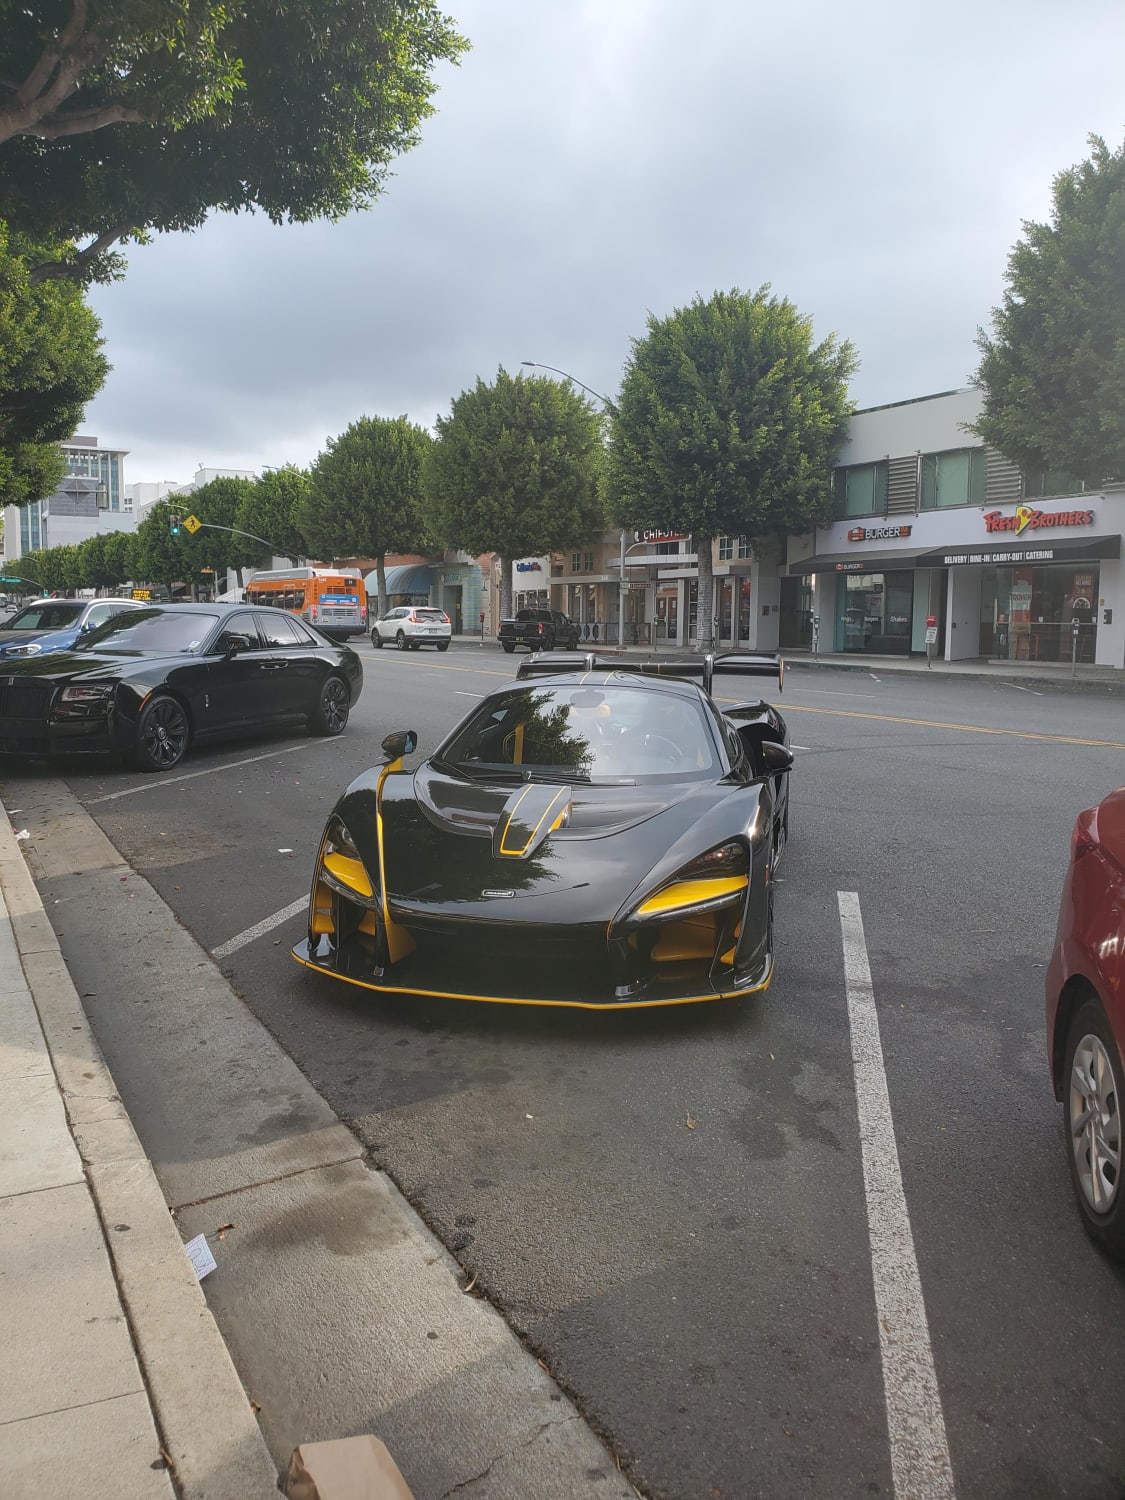 McLaren Senna with a casual Rolls Royce Ghost next to it, 2 for 1